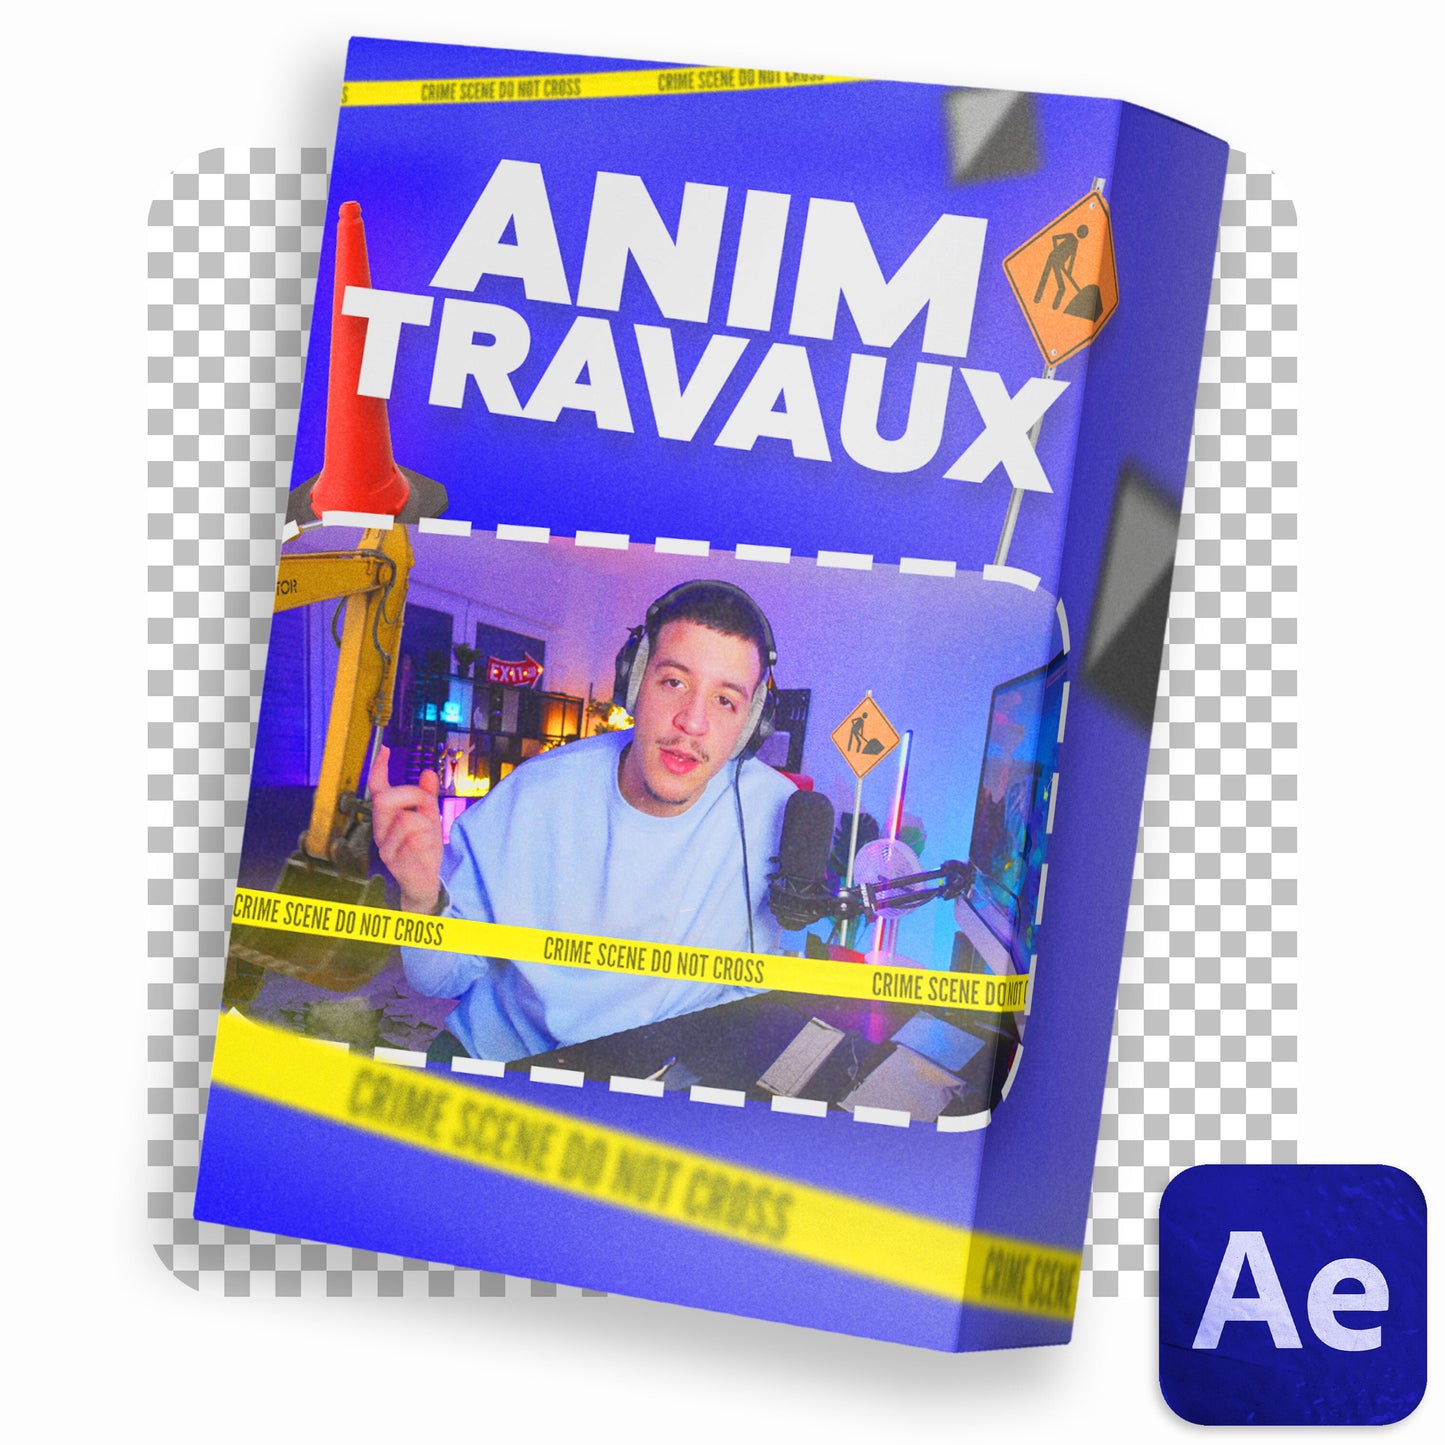 "ANIMATION TRAVAUX/SOCIALS" PROJET AFTER EFFECTS - SAM